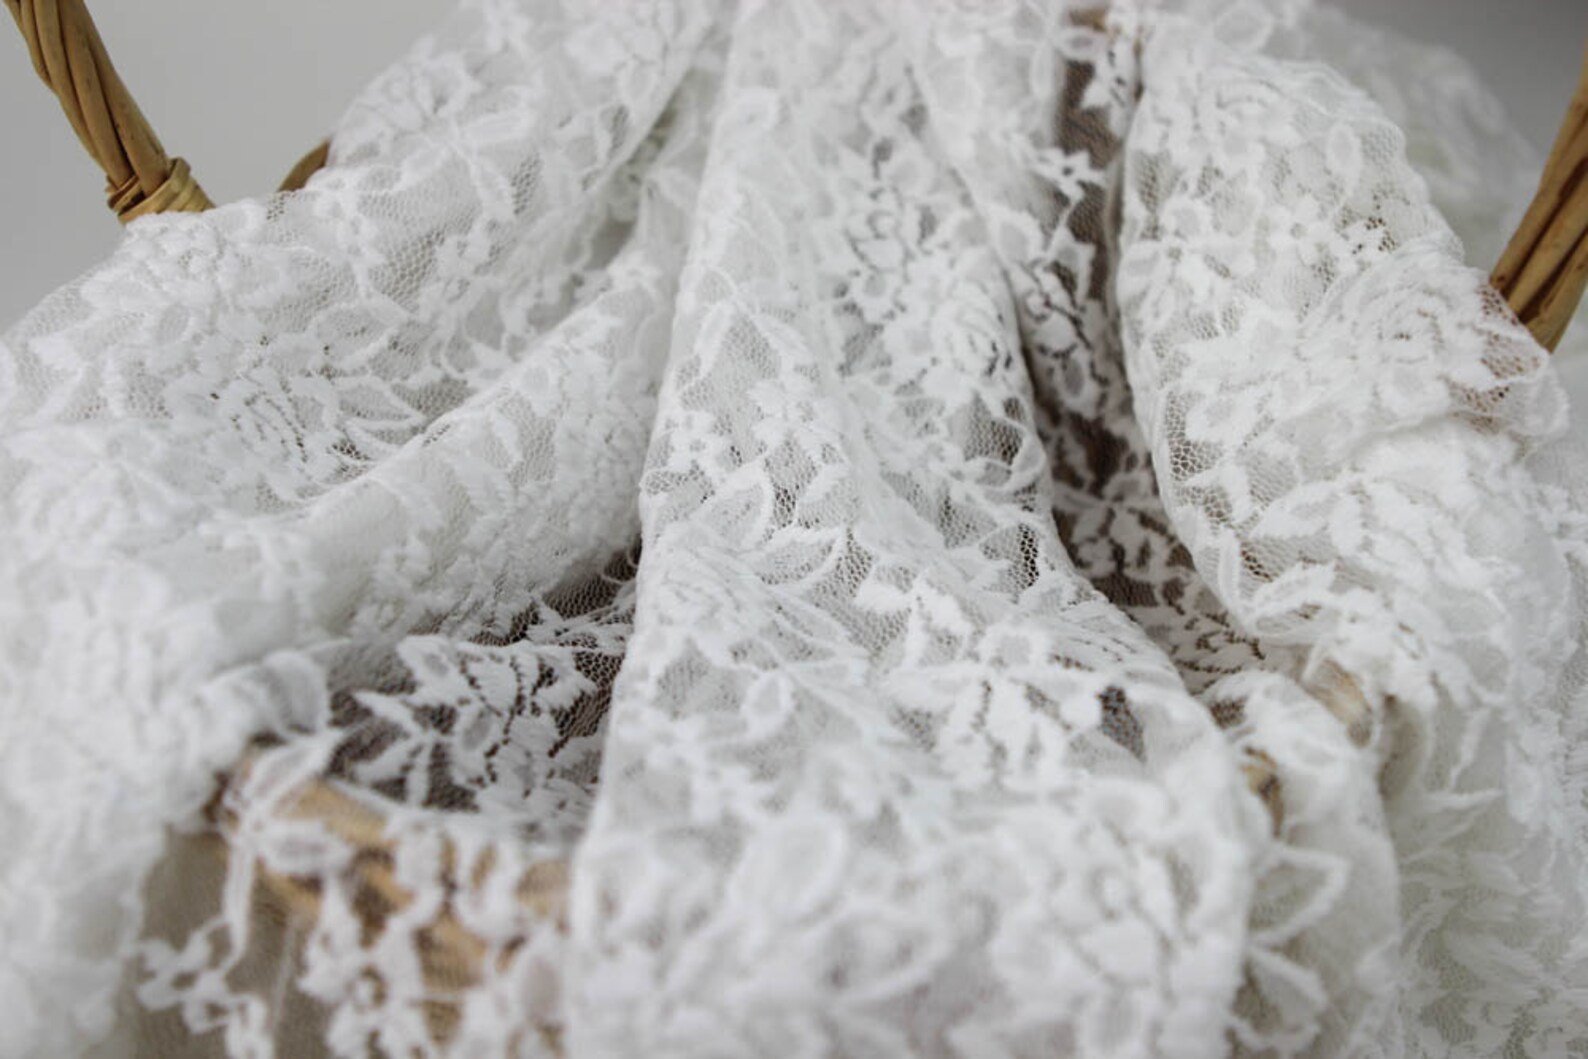 Off White Scalloped Lace Fabric by the Yard Wedding Bridal | Etsy